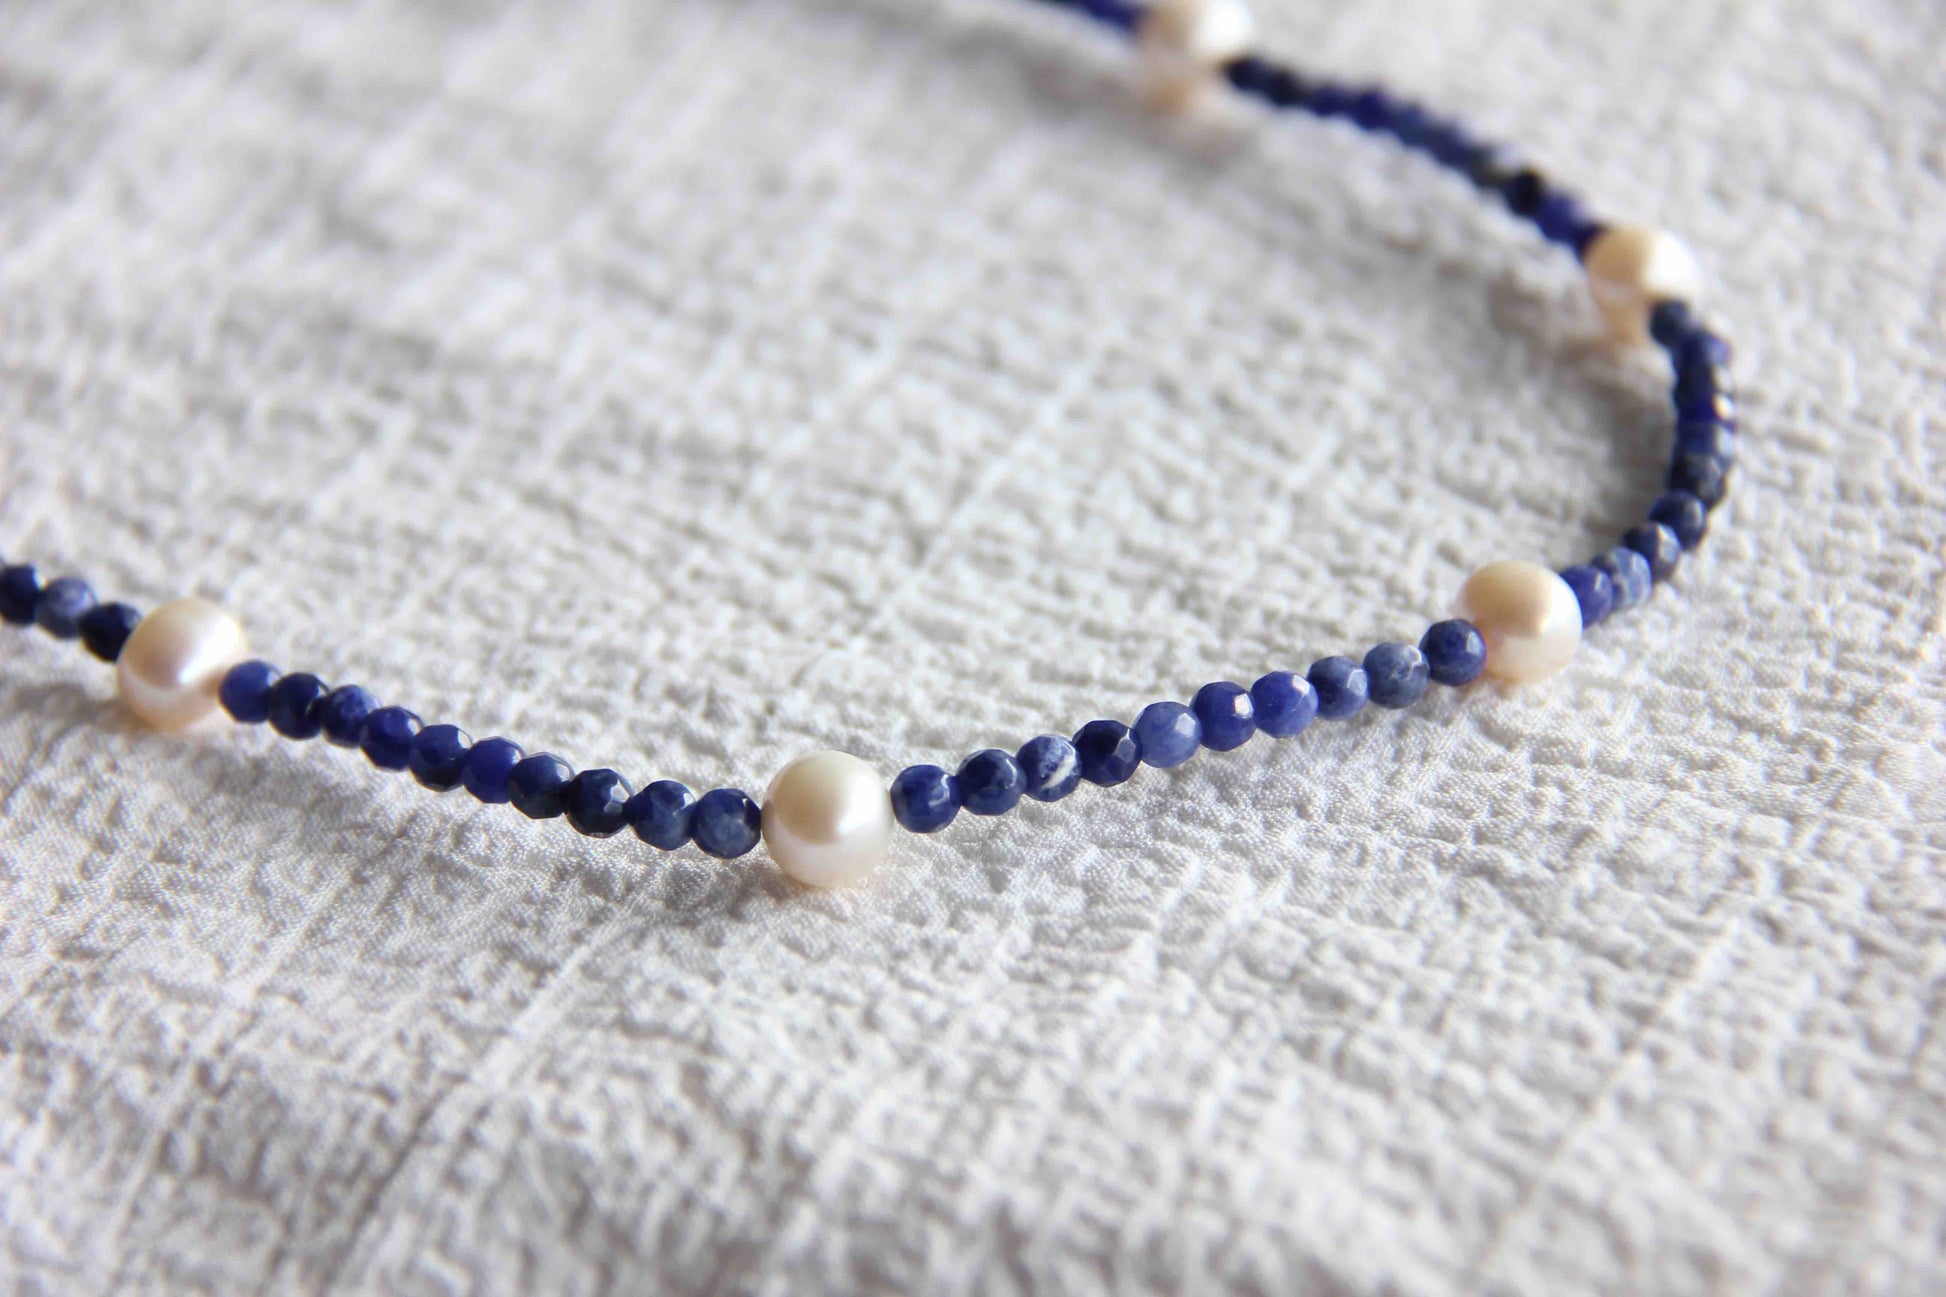 Sodalite Pearl Necklace, Pearl Necklace, Sodalite Necklace, Gemstone Necklace, Necklace for Women, Sodalite Meaning, Sodalite Crystal